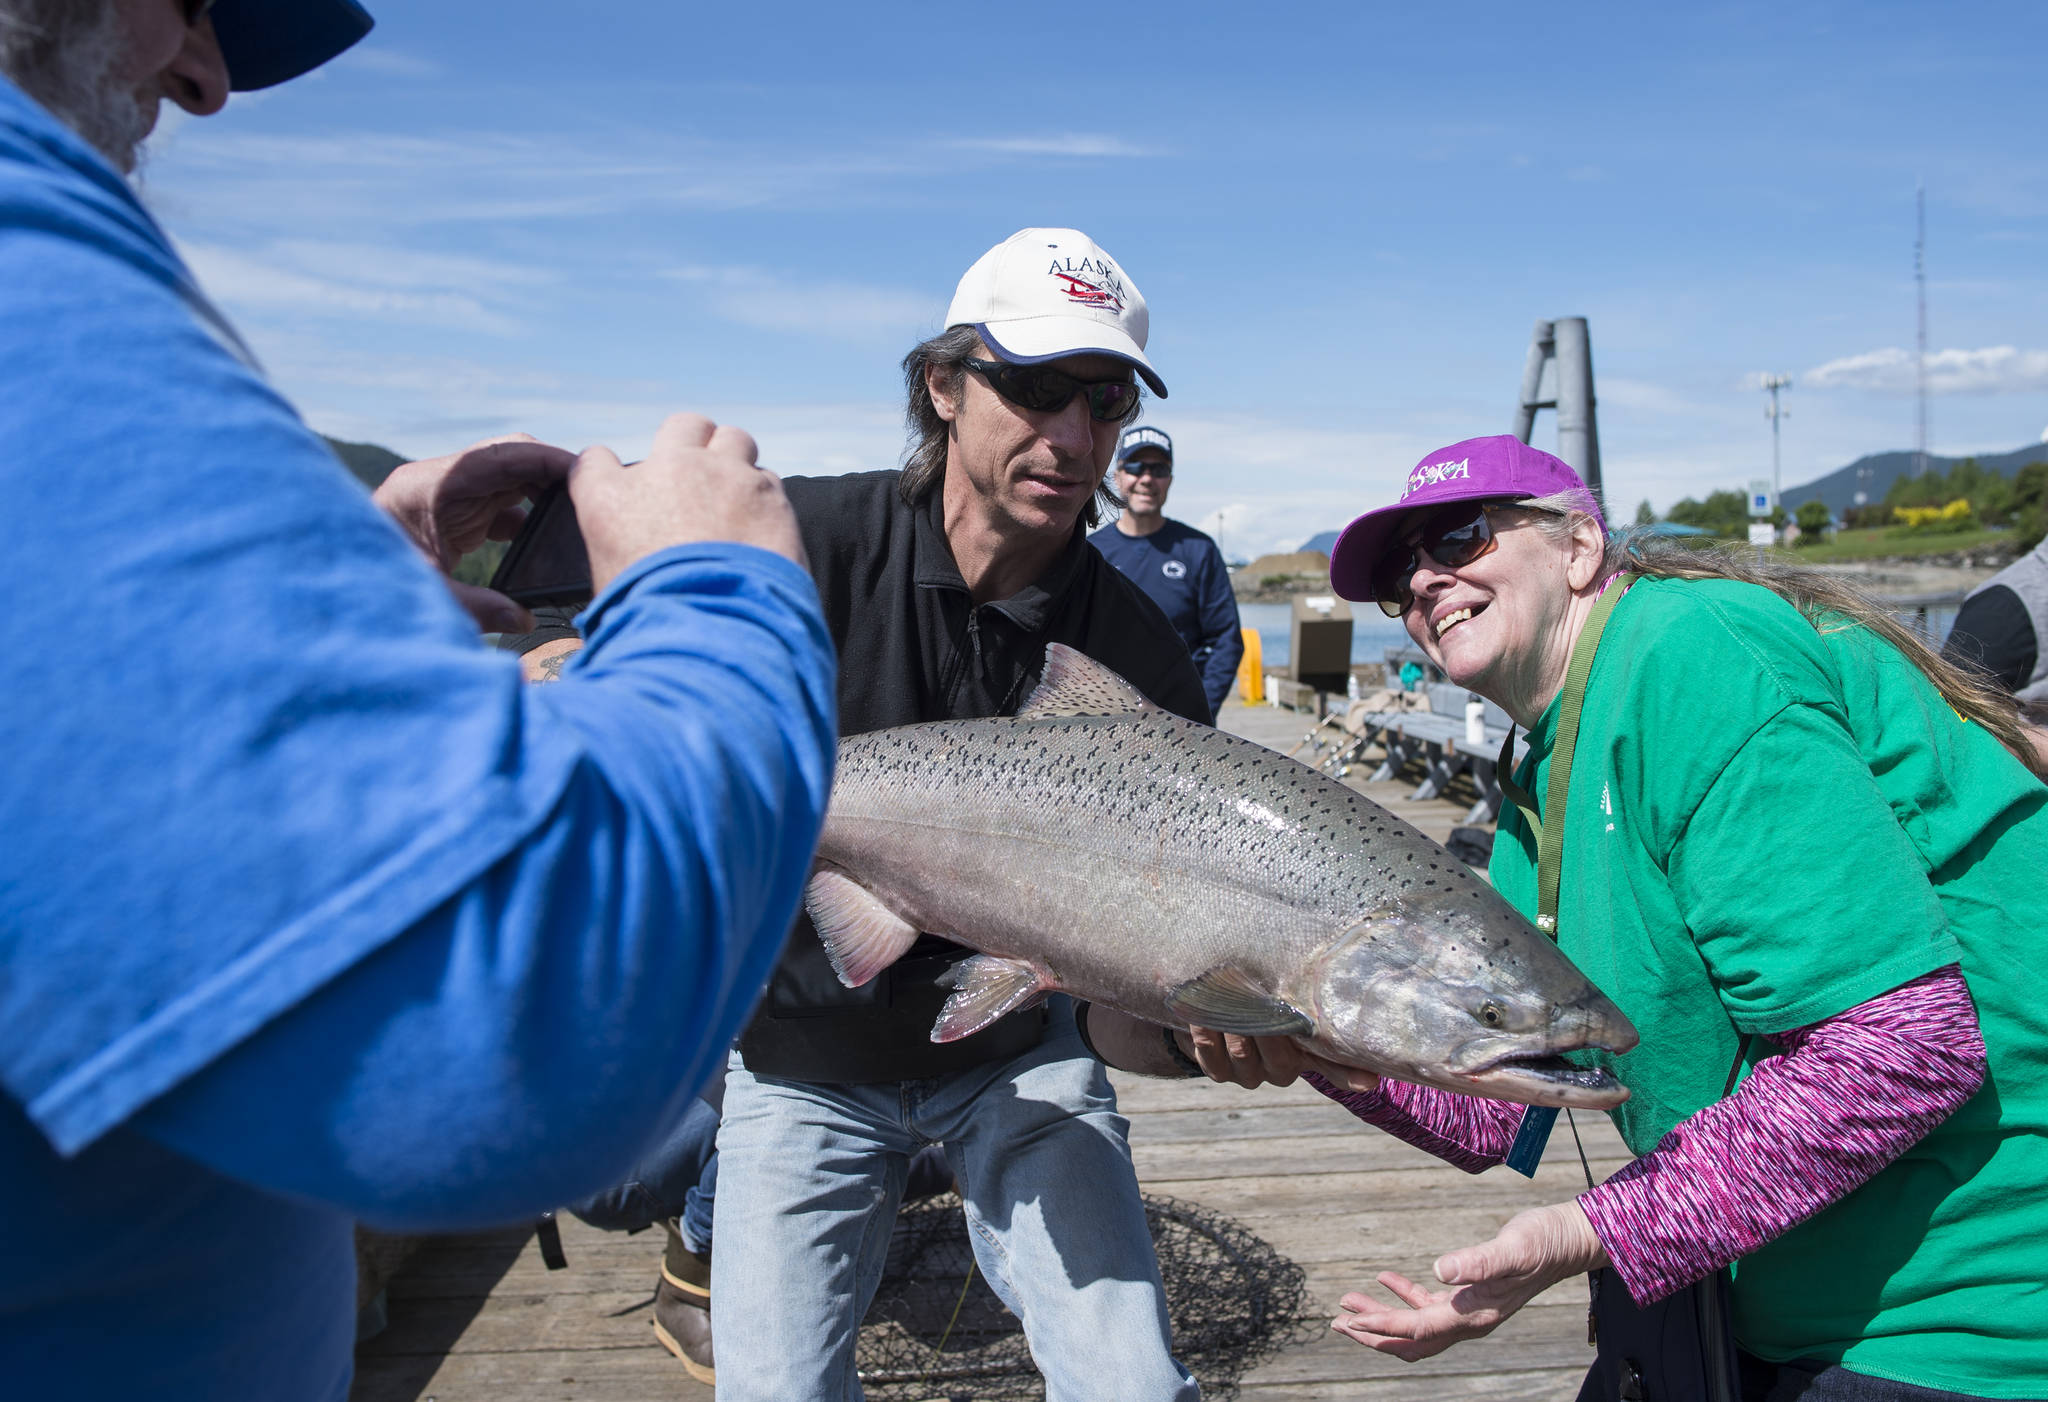 Paula Varney, right, has her picture taken by her husband, Brad, with an estimated 25-pound king salmon held by fishing guide Paul Turinsky, of Chum Fun!, at the Wayside Park on Channel Drive on Wednesday, June 13, 2018. The fish was released after the picture but king salmon can be kept starting today. (Michael Penn | Juneau Empire)